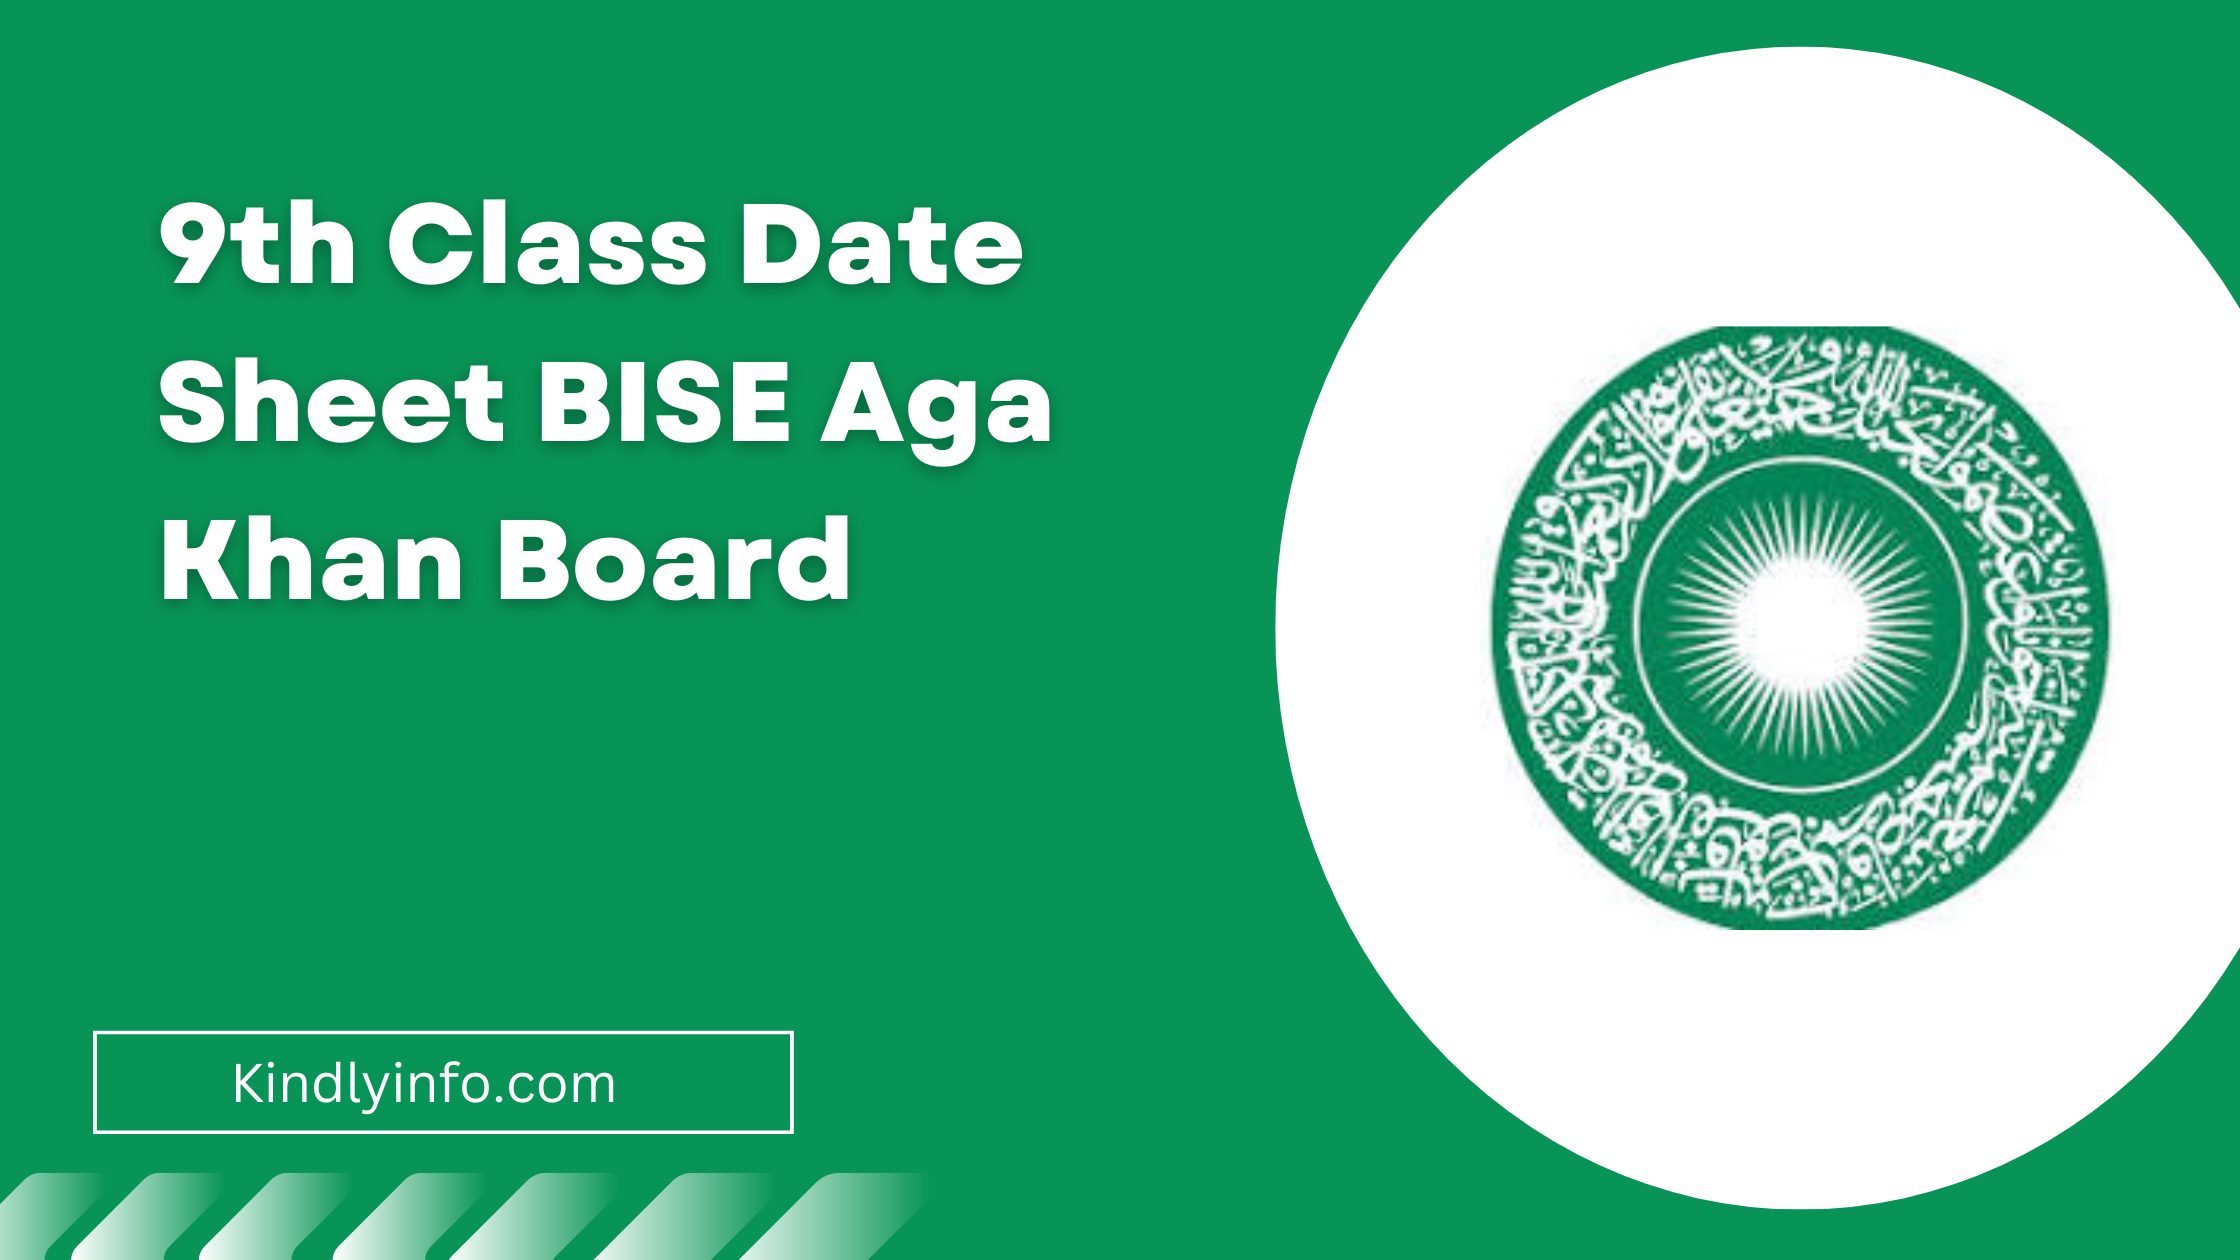 Discover the latest date sheet of the 9th class for BISE Aga Khan Board 2024. Plan your studies effectively with updated schedule. Read more.